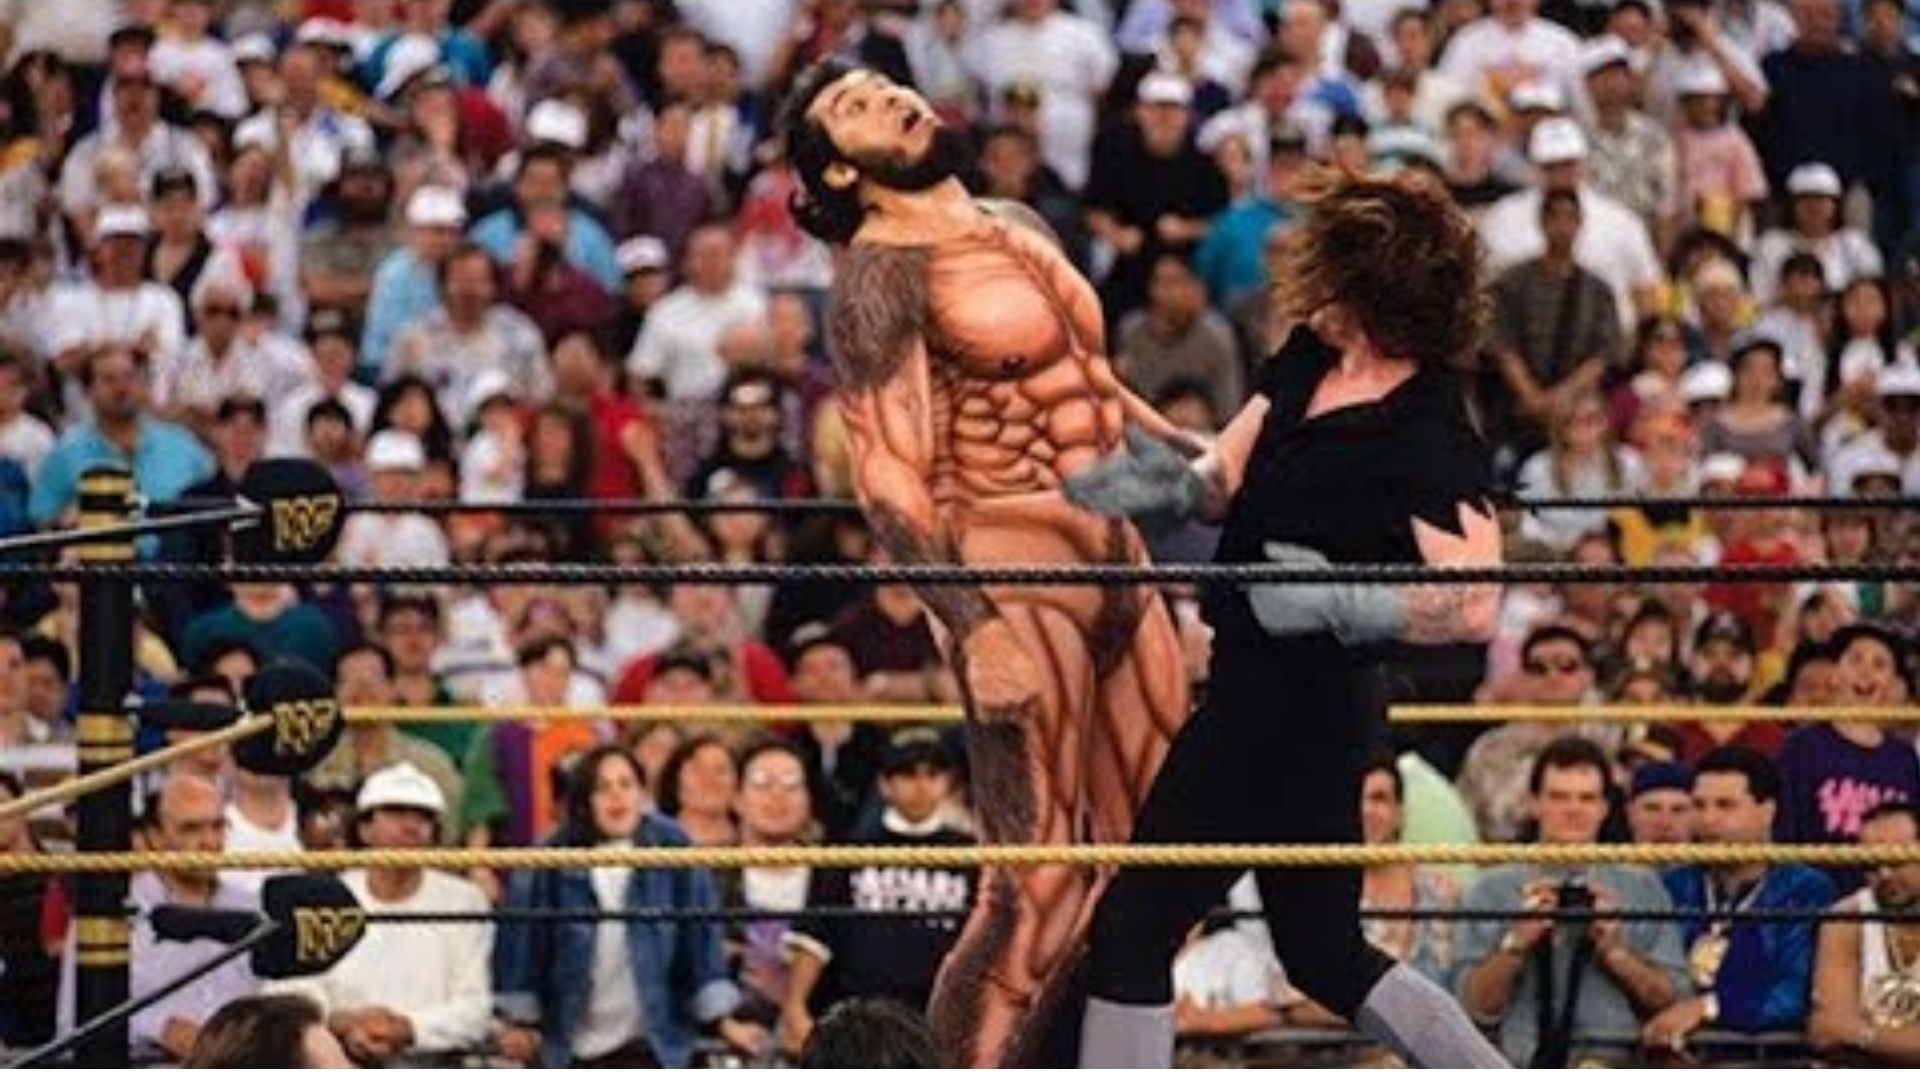 The Prince of Darkness v/s The Giant Gonzalez at WrestleMania